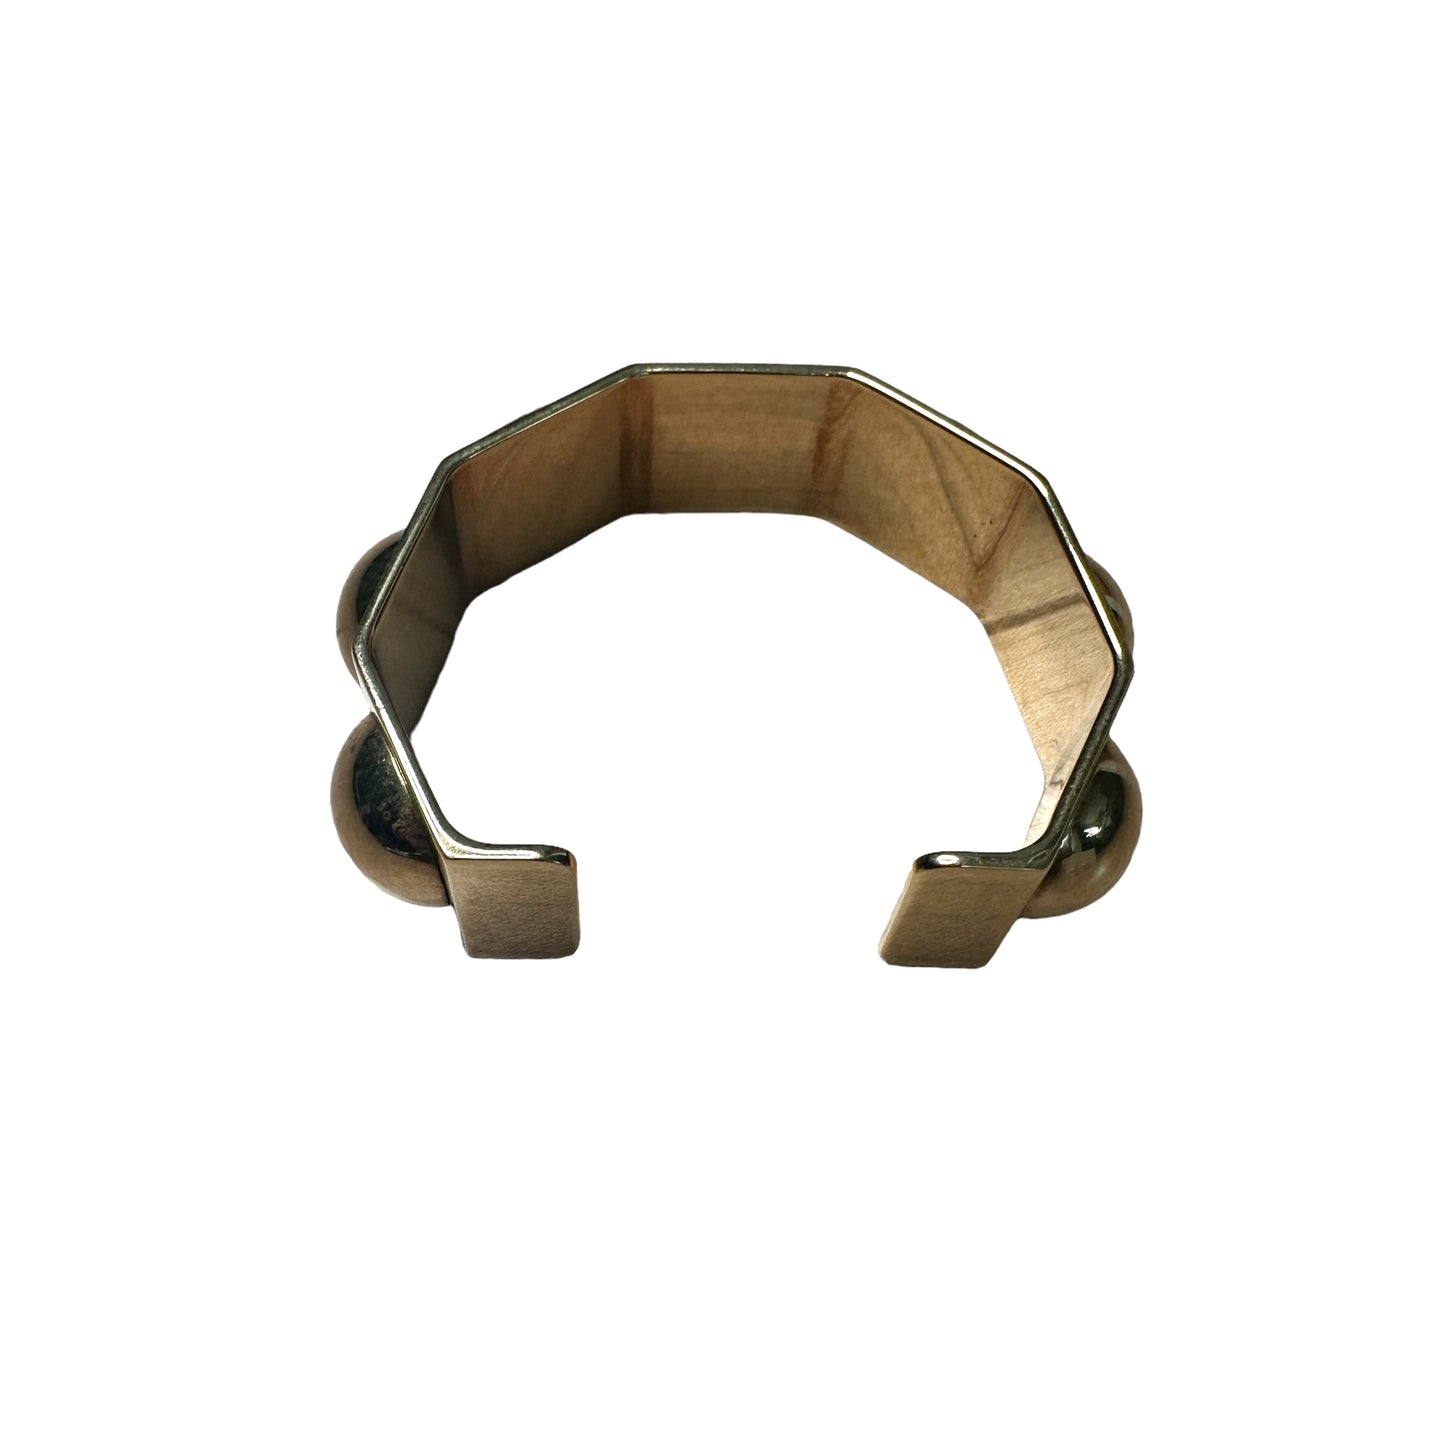 Gold Plated Phoebe Philo Cuff